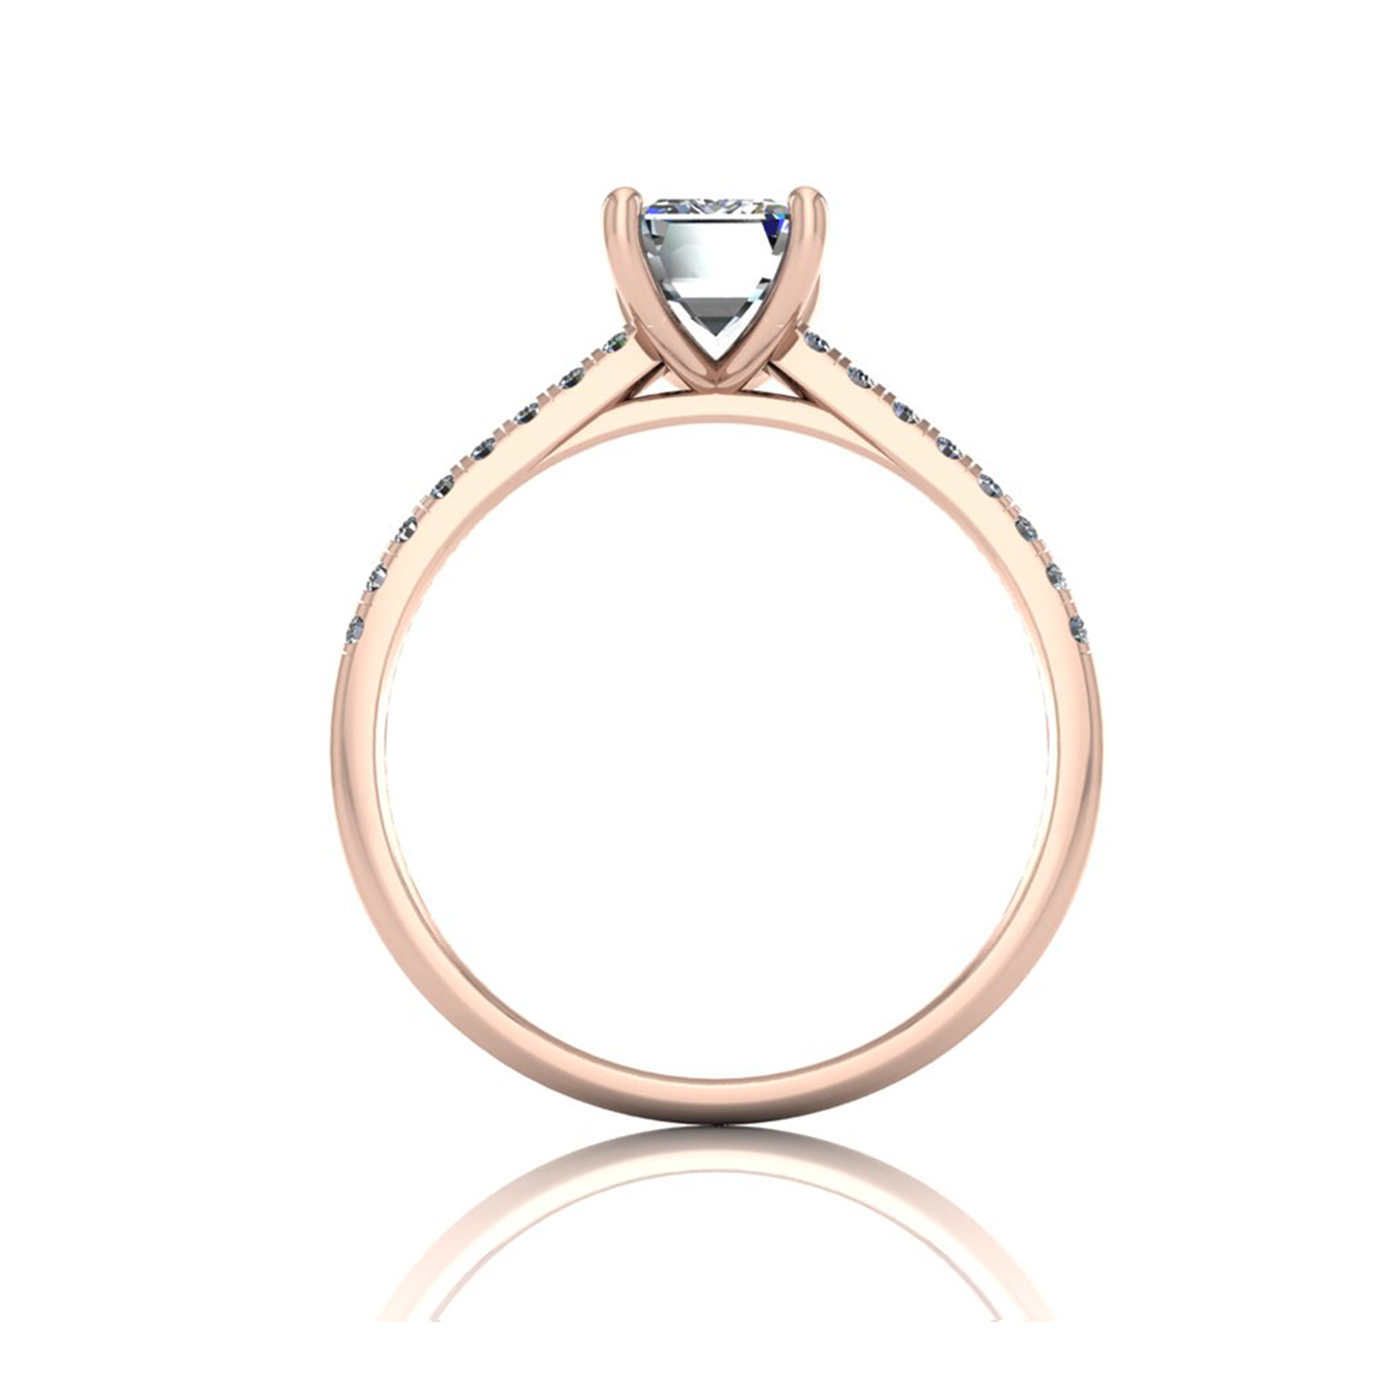 18k rose gold 1.0ct 4 prongs emerald cut diamond engagement ring with whisper thin pavÉ set band